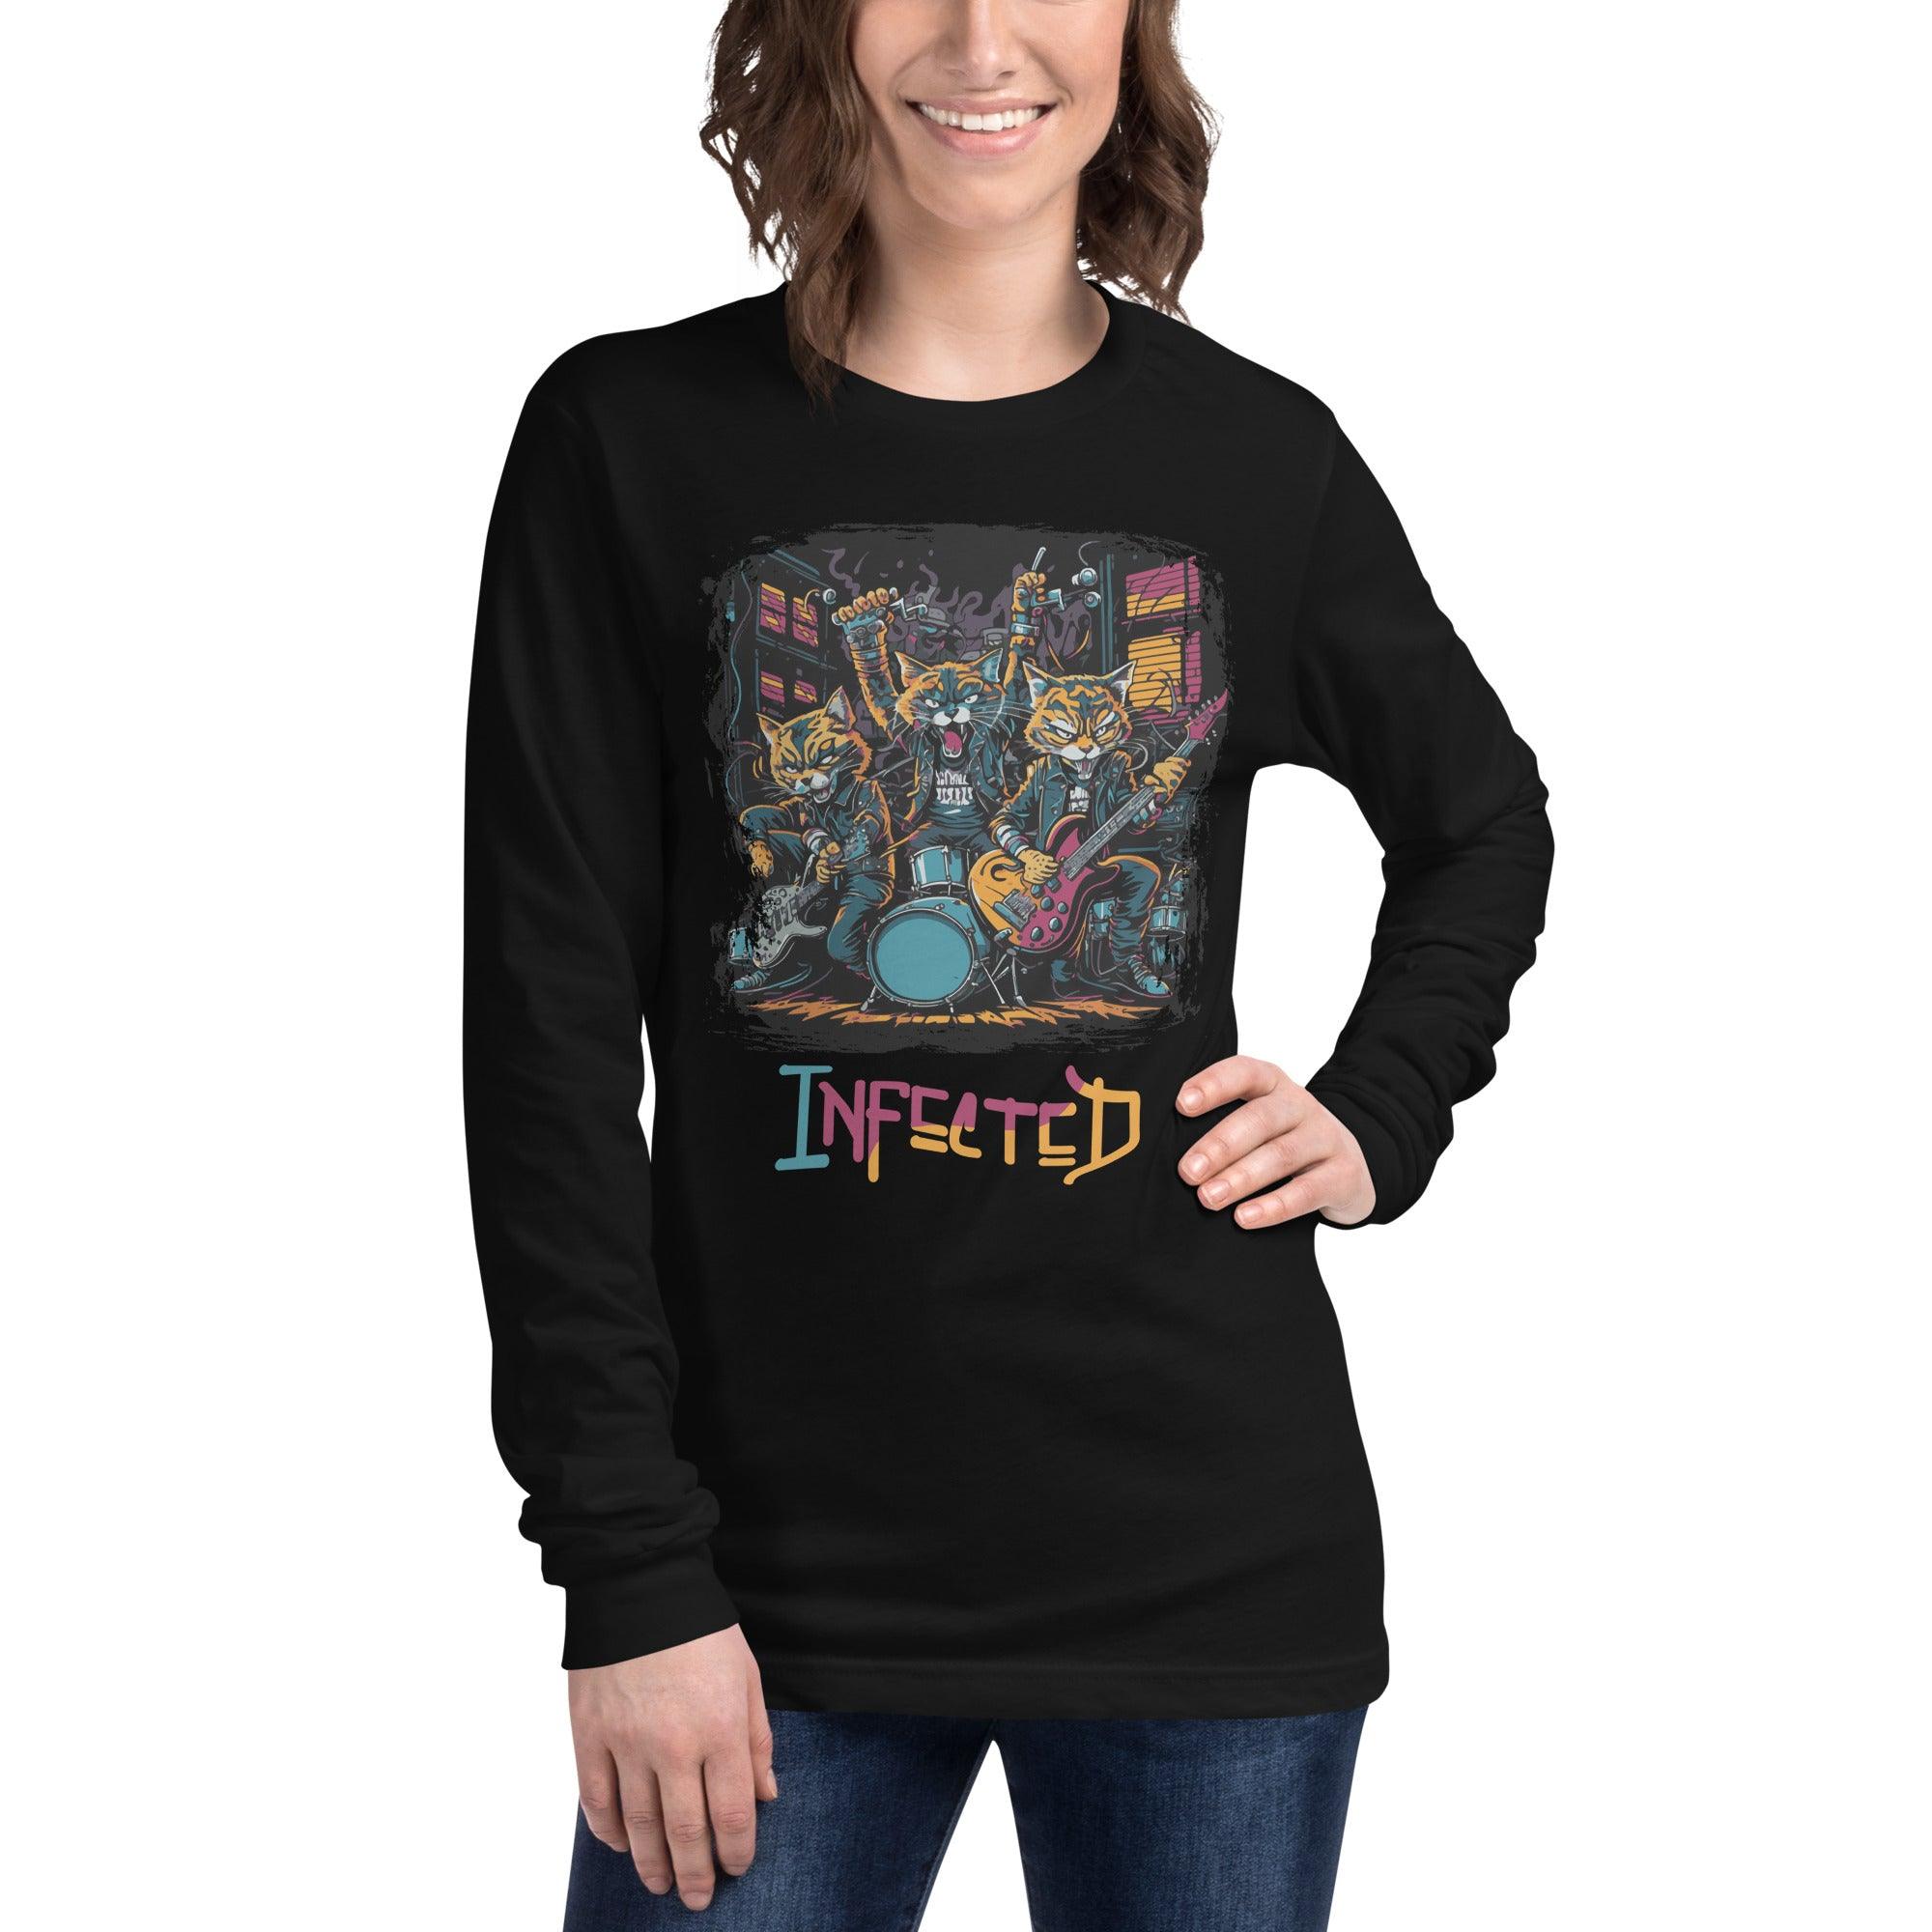 Infected Unisex Long Sleeve Tee - Beyond T-shirts